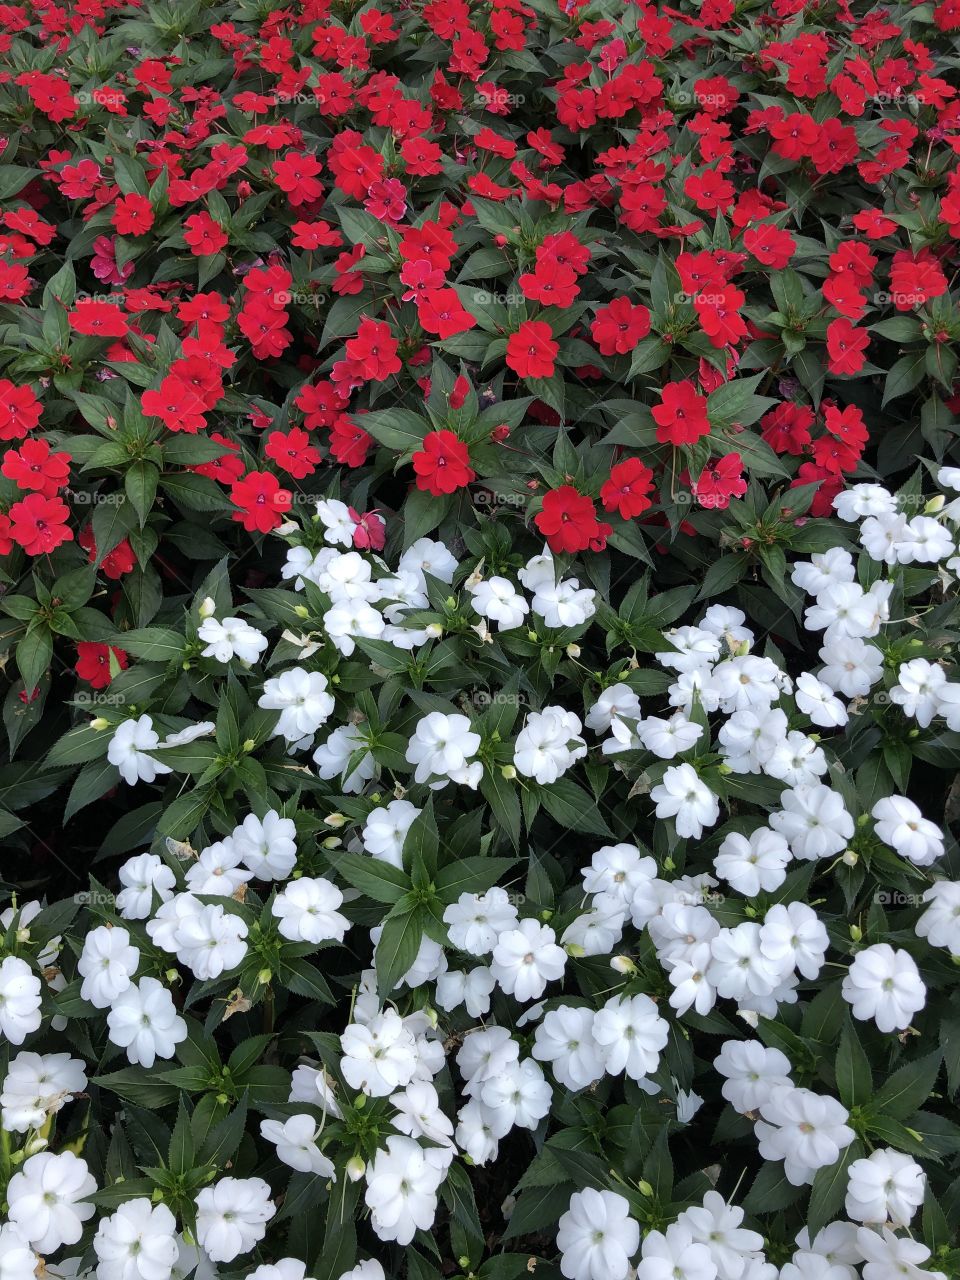 Red & White flower bed